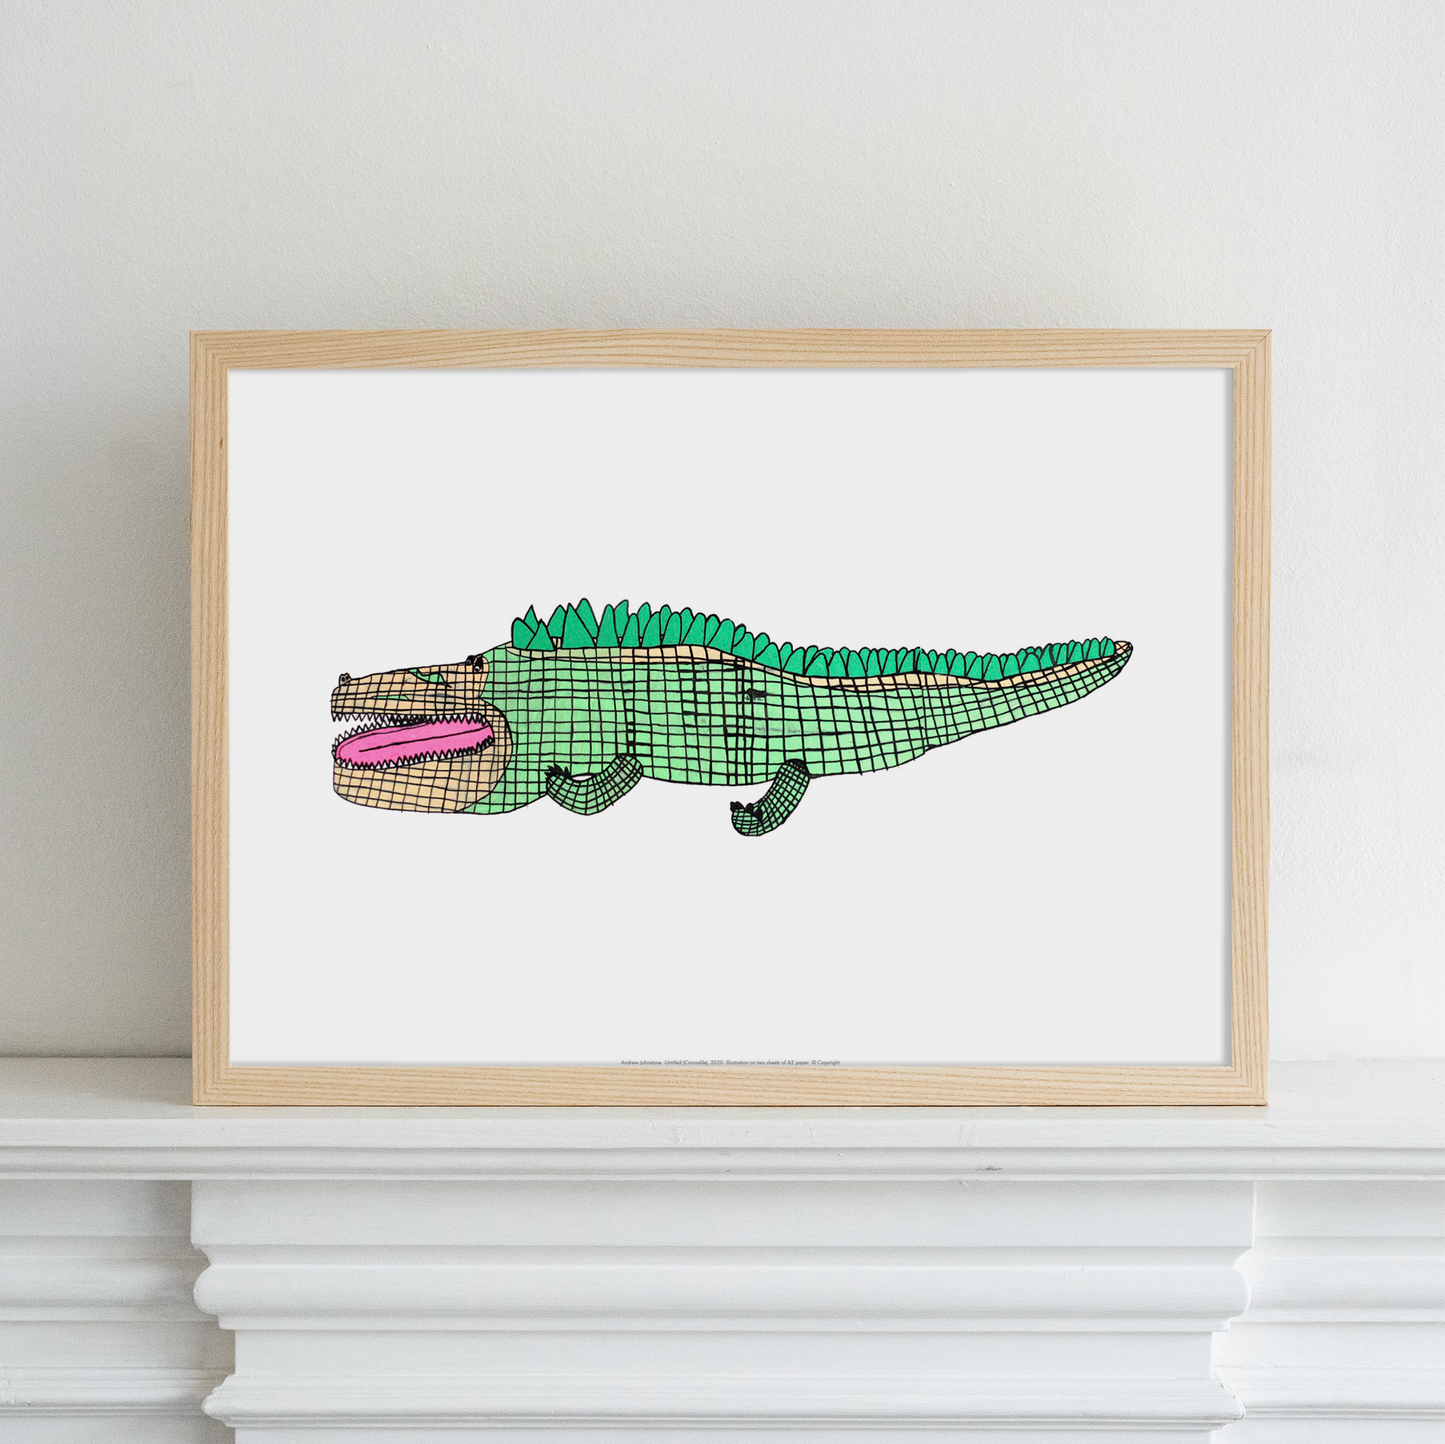 Framed reproduction of Andrew Johnston limited edition crocodile artwork